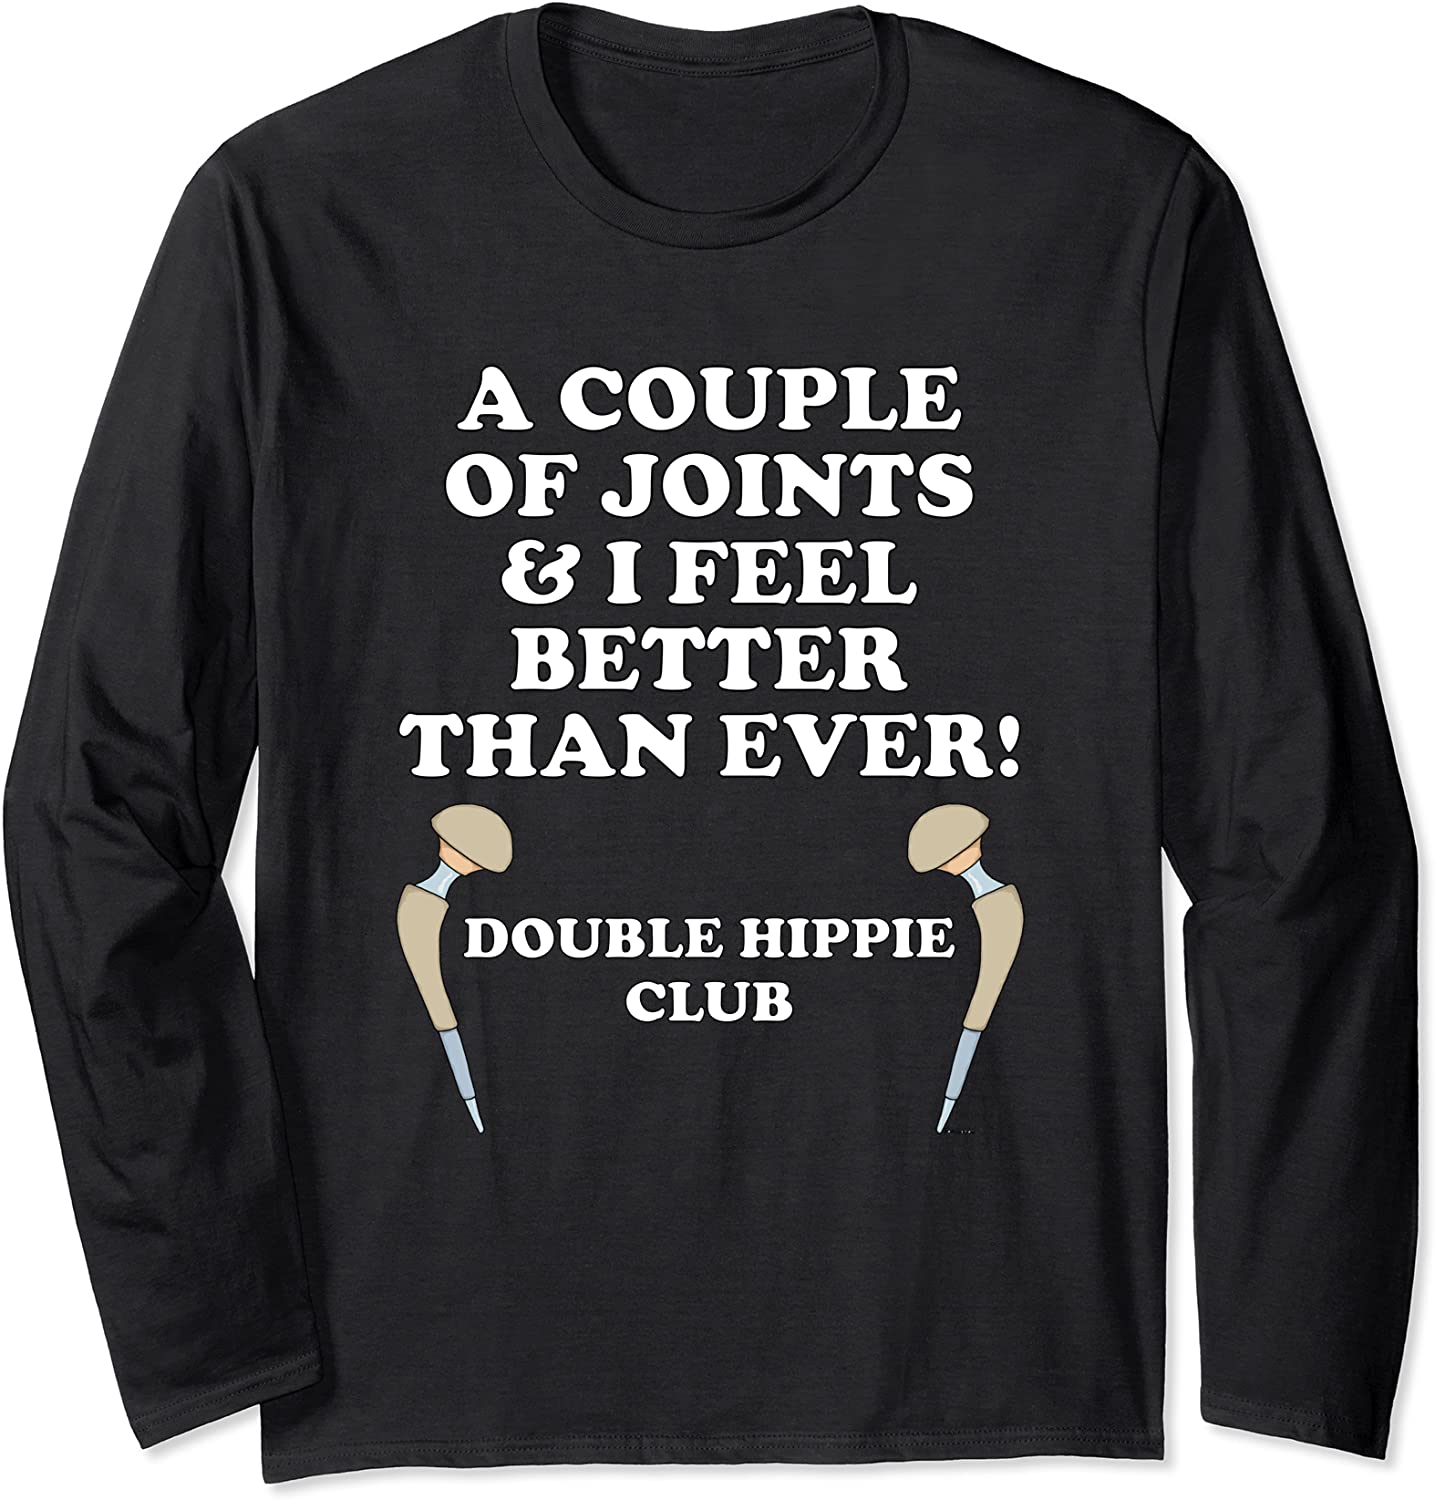 Double Hippie Club COUPLE OF JOINTS Long Sleeve